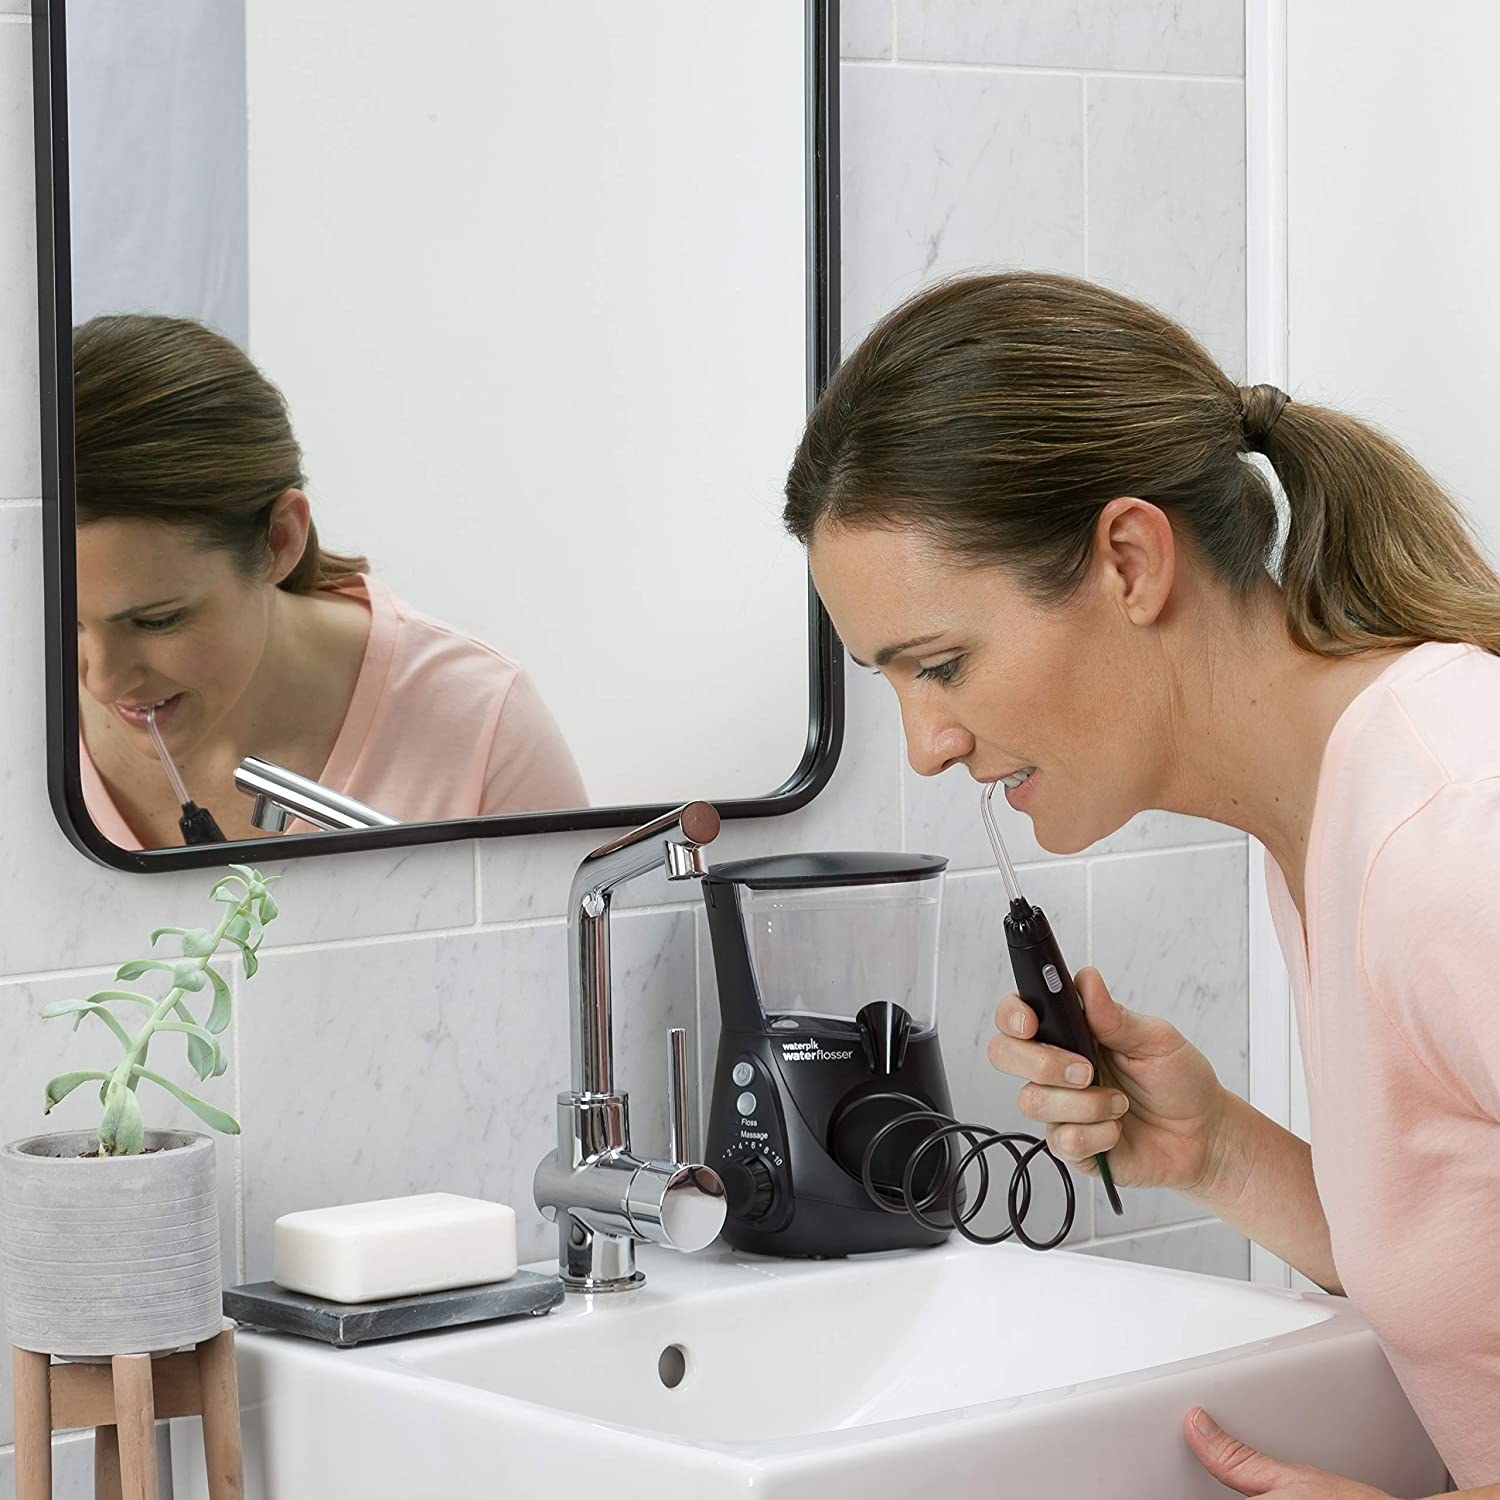 A person cleaning their teeth with a water flosser machine in their bathroom